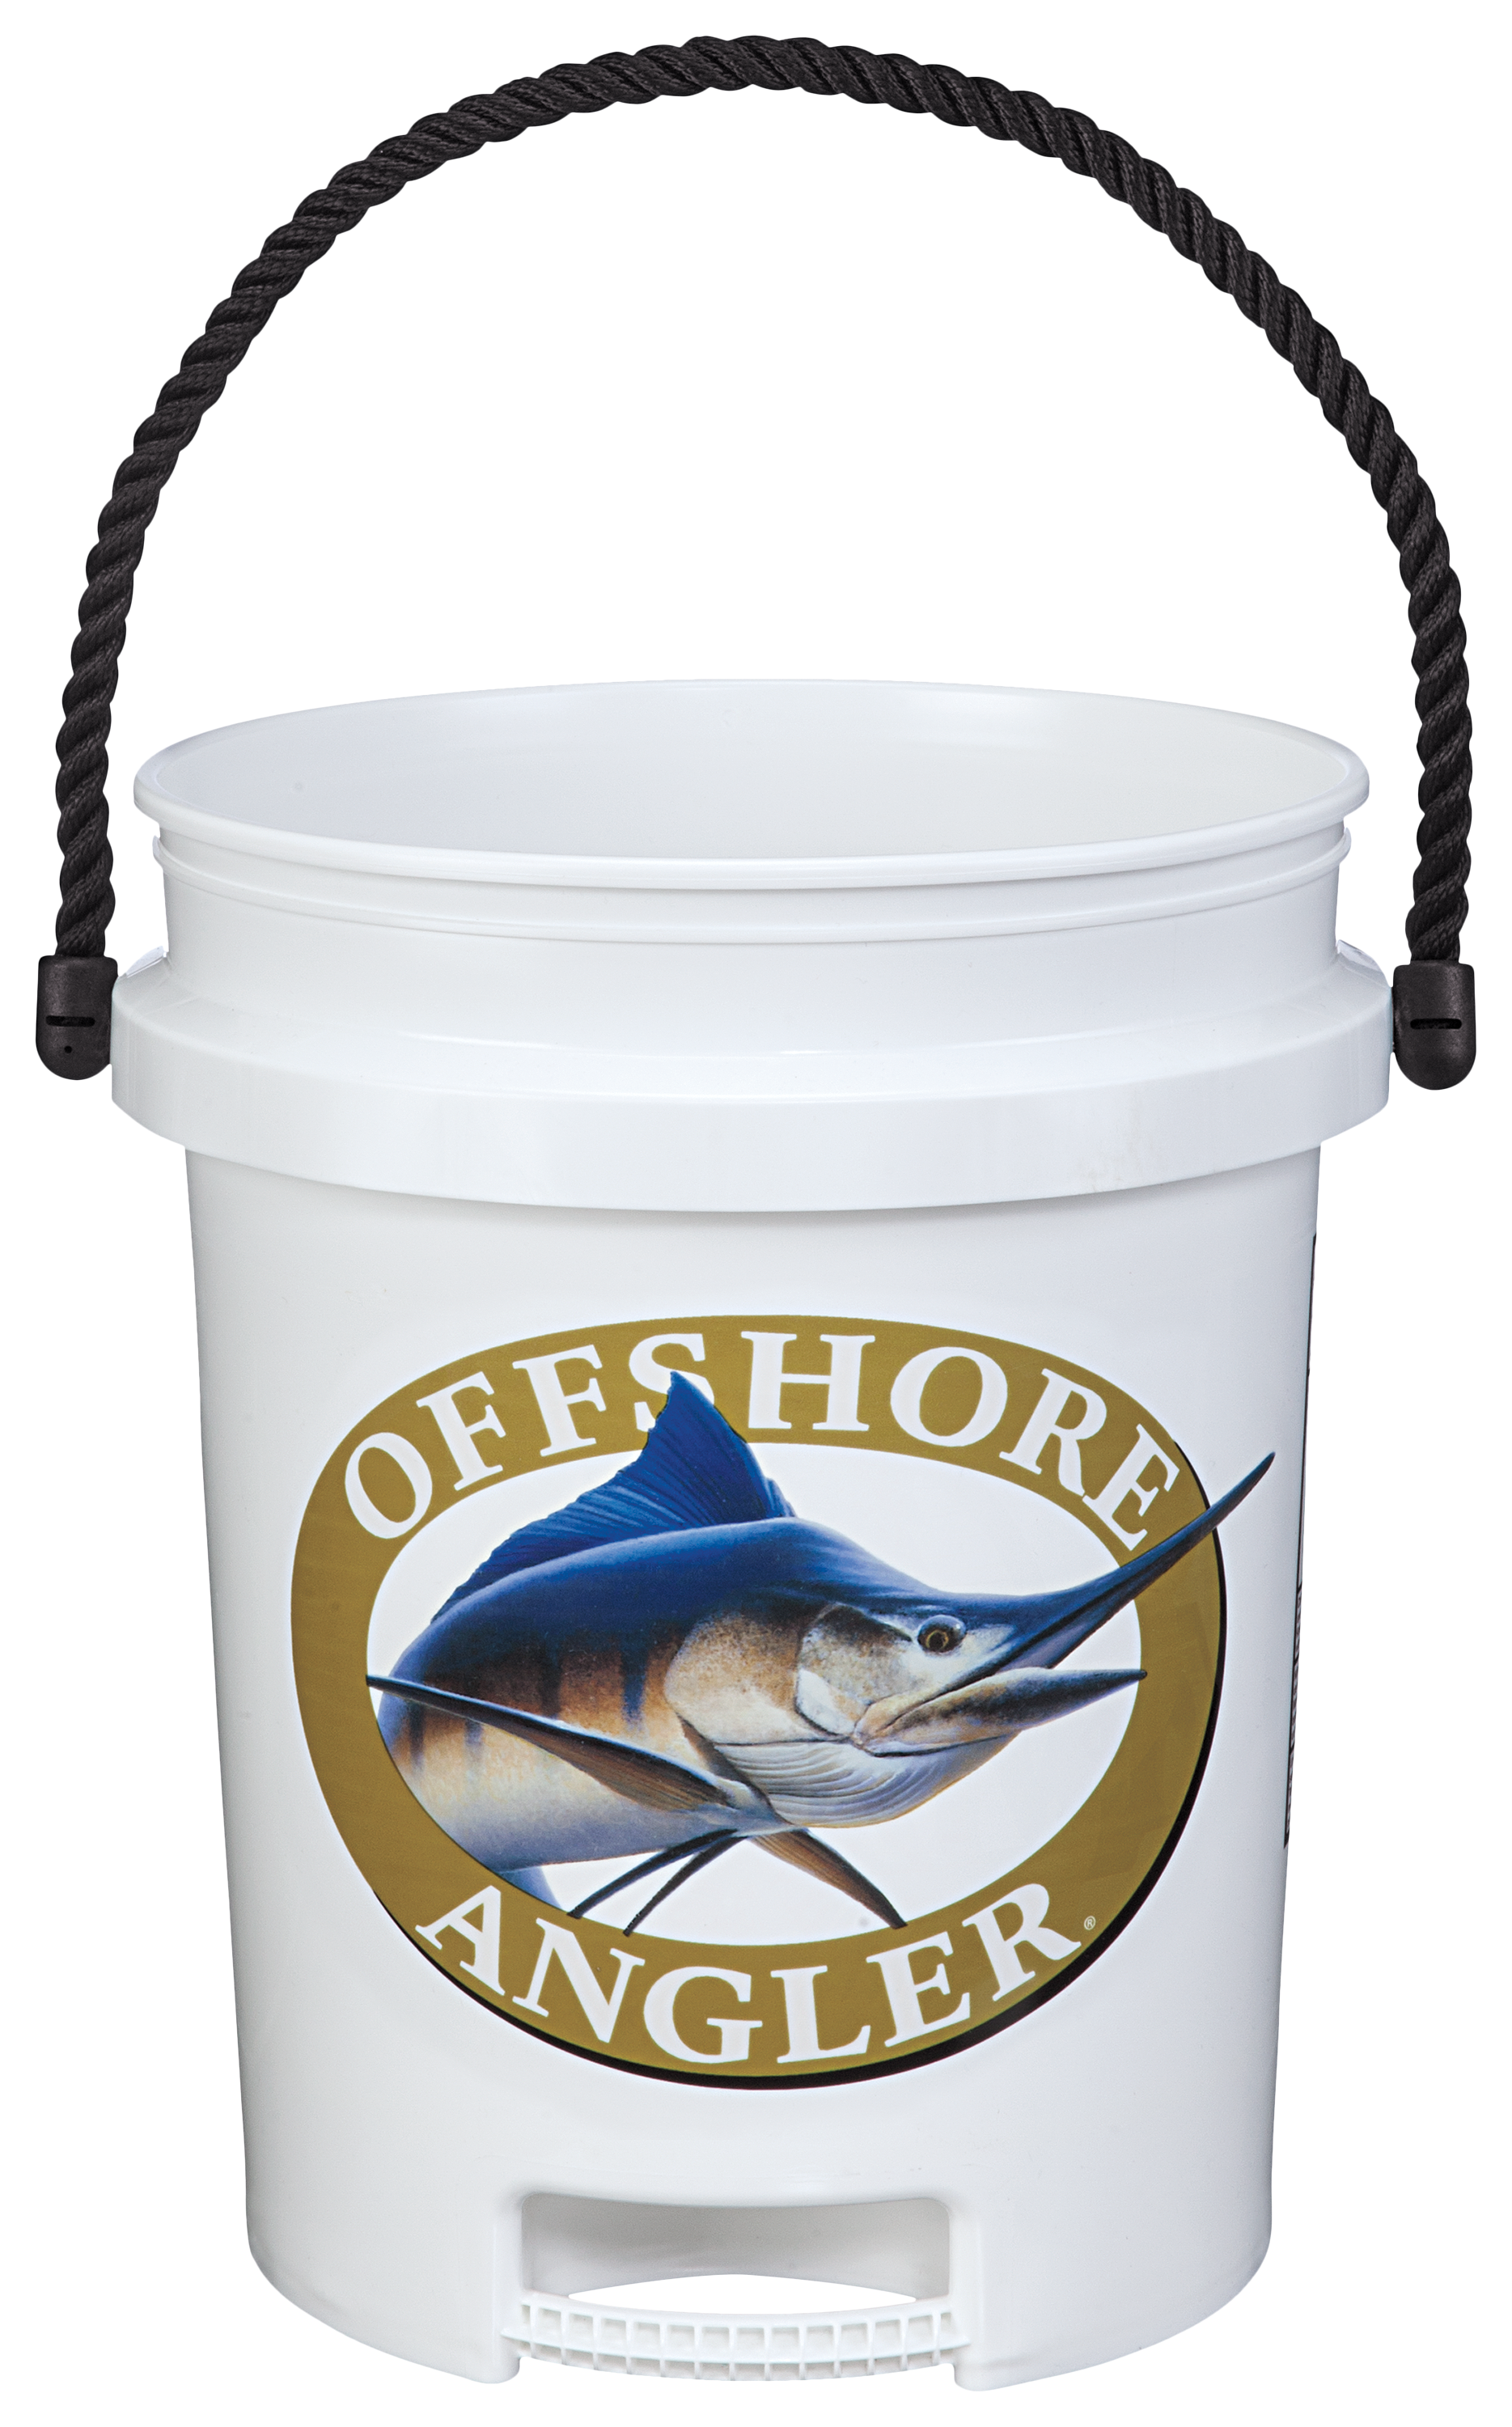 Built-in Bottom Handle 5 Gallon Bucket with Rope Handle